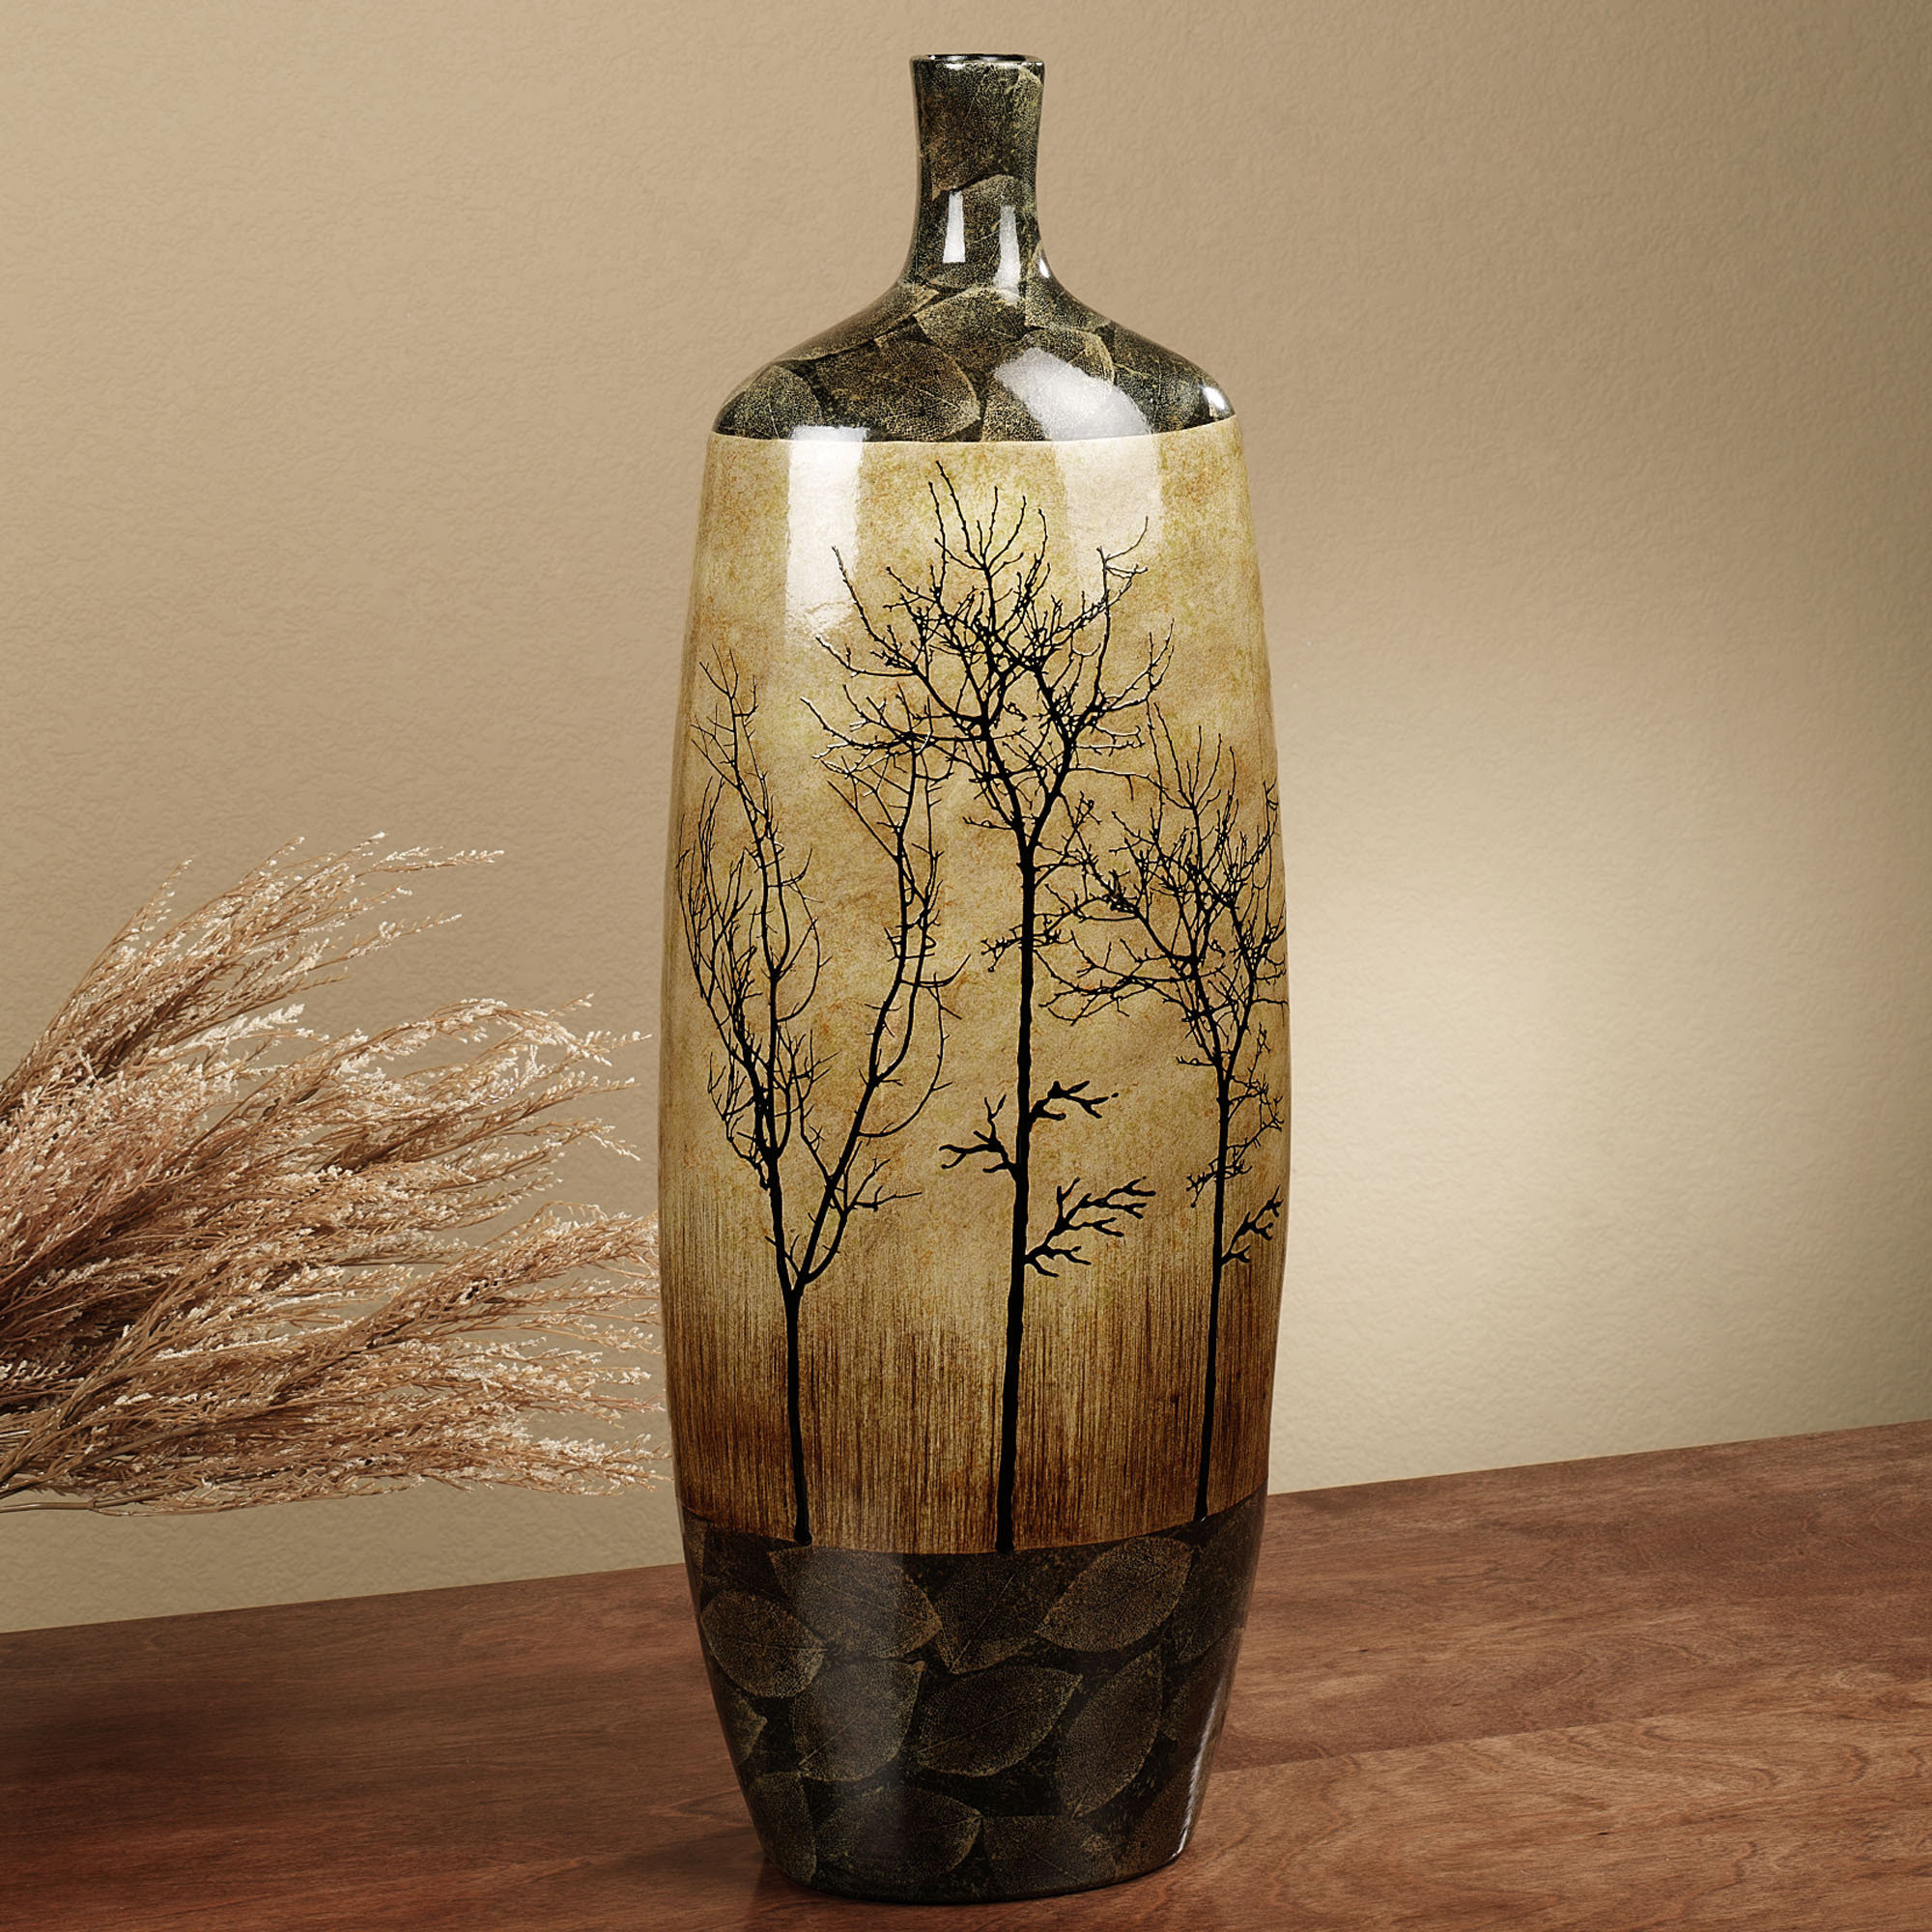 24 Fabulous Cherokee Wedding Vase 2024 free download cherokee wedding vase of oversized floor vases vase and cellar image avorcor com within large floor vases 12 in decors